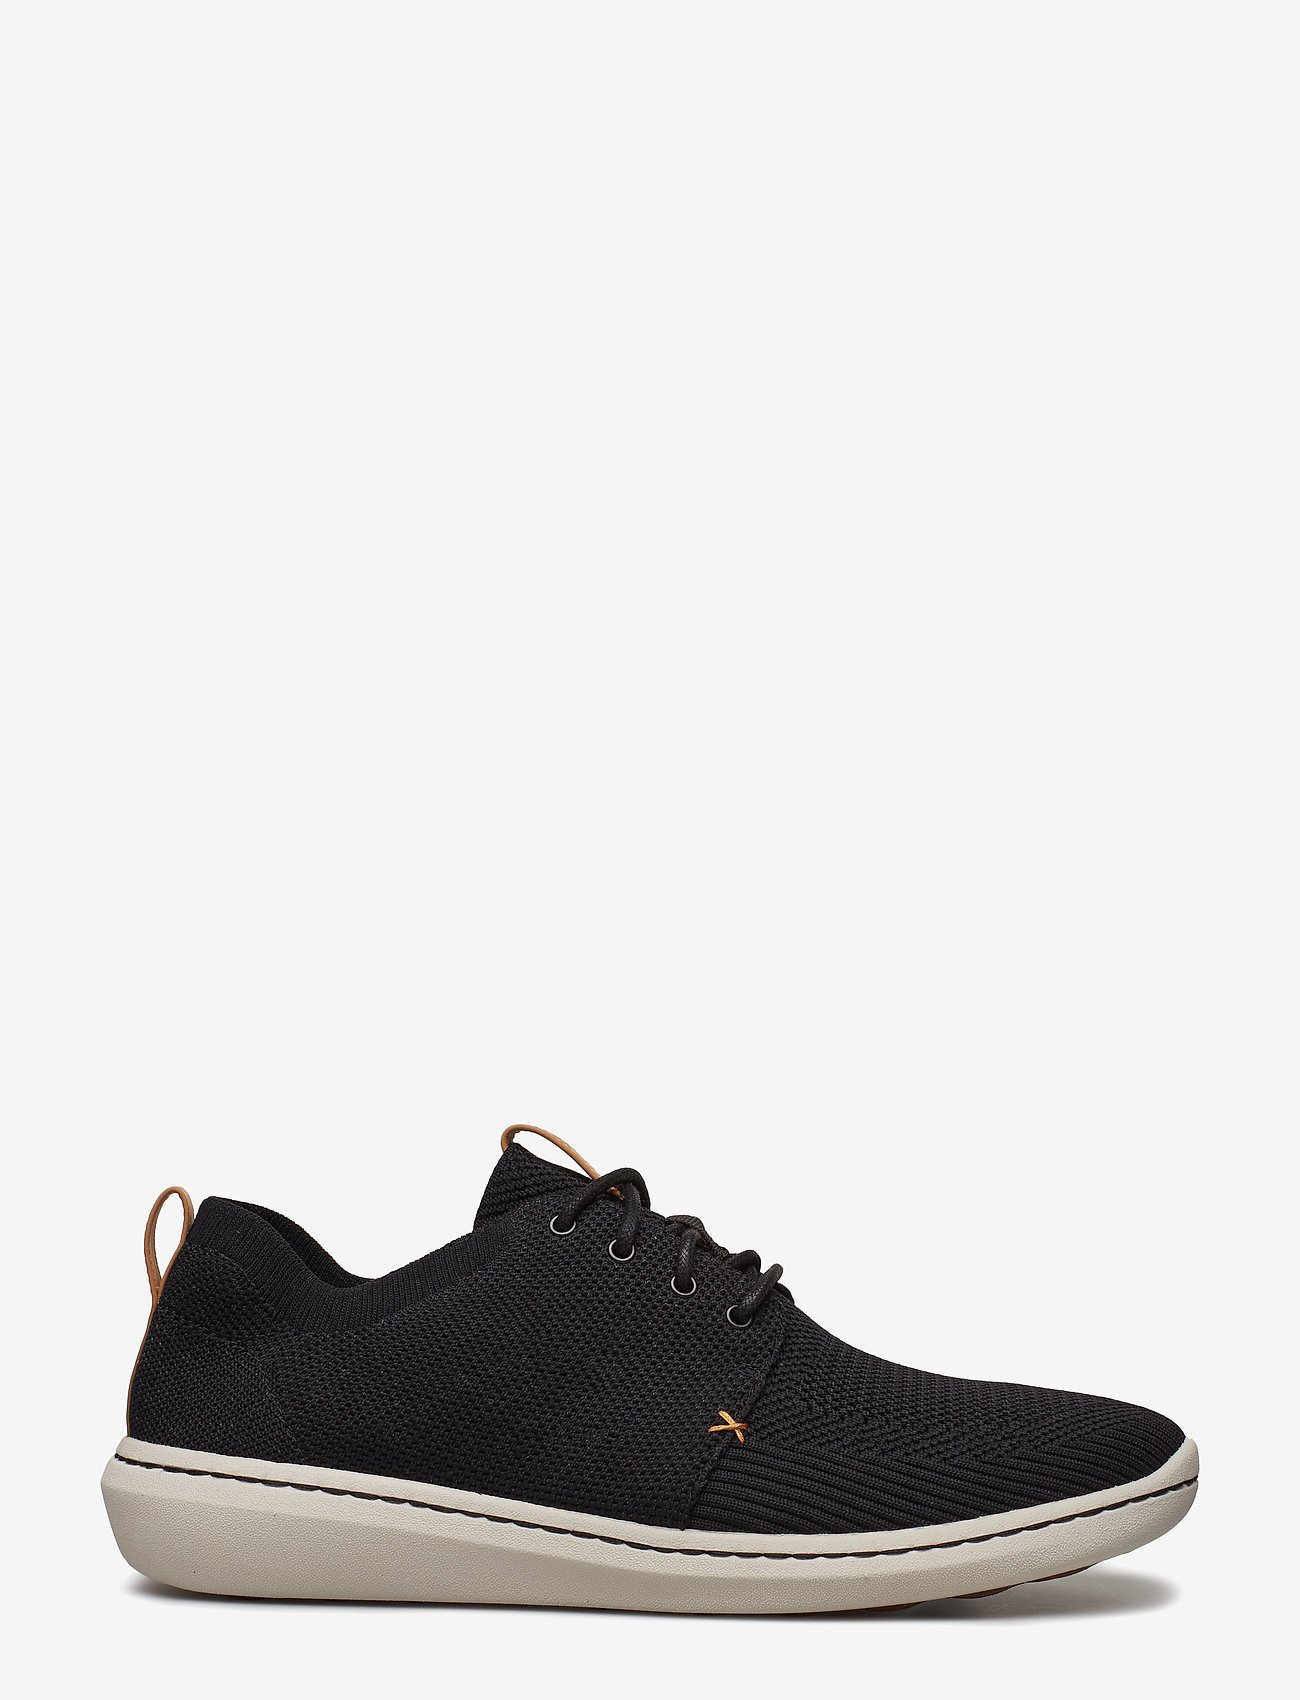 Clarks - Step Urban Mix G - lave sneakers - 1001 black - 1